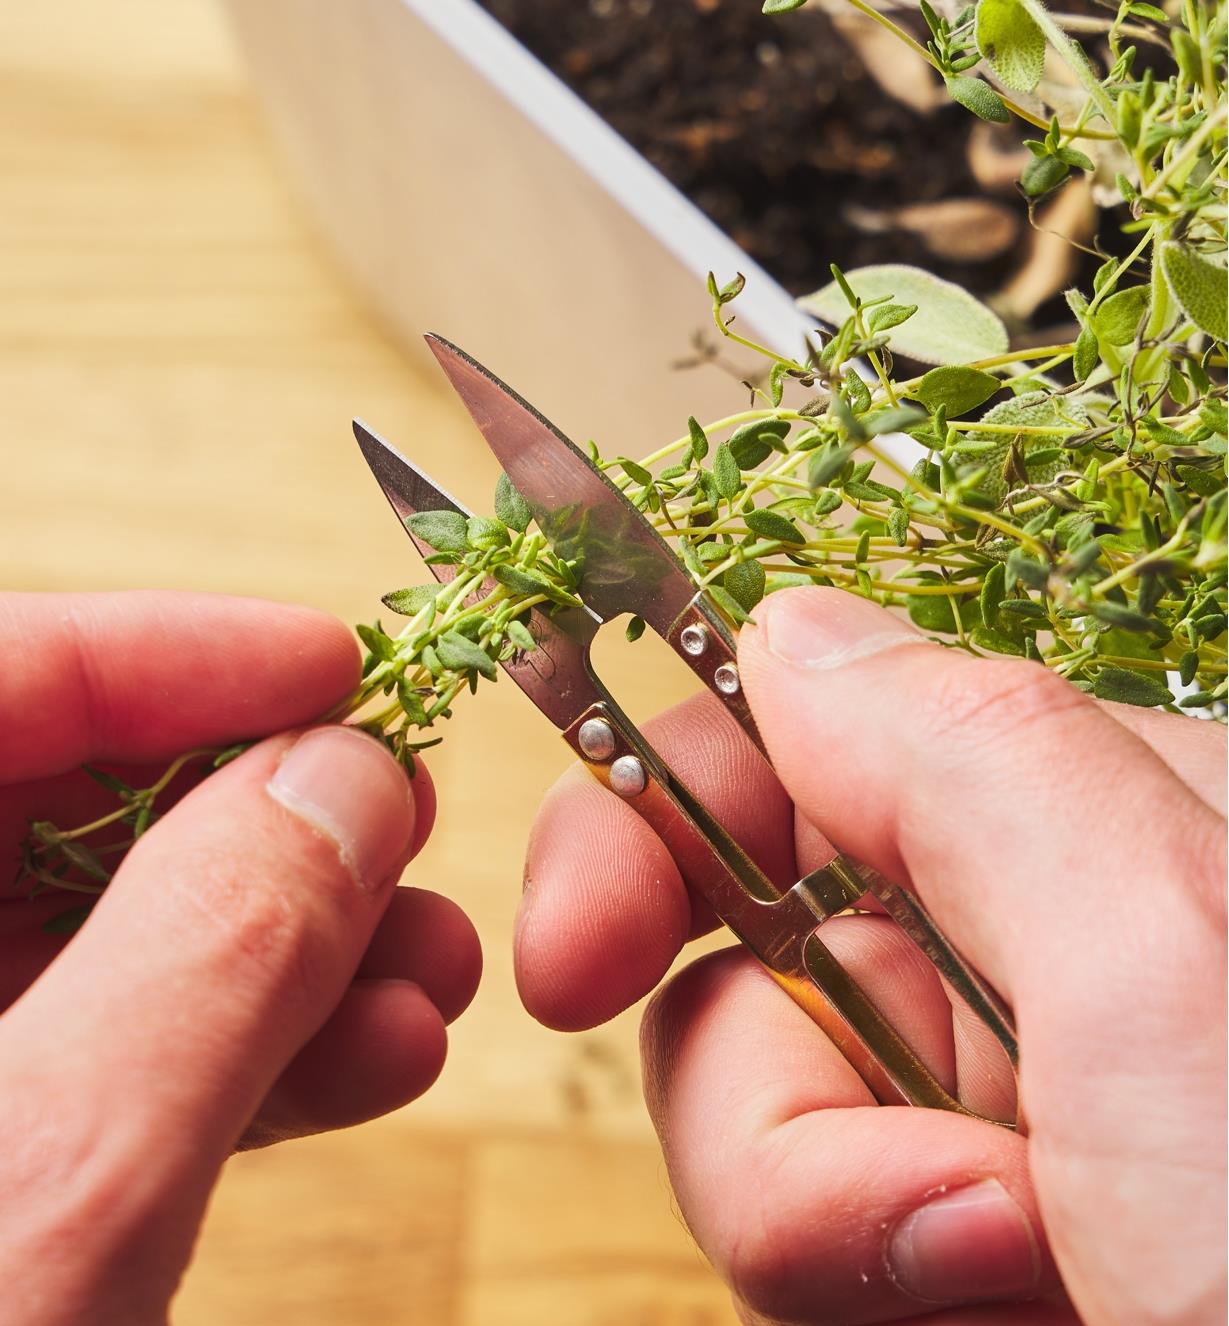 Using a pair of spring shears to harvest a sprig from a potted thyme plant